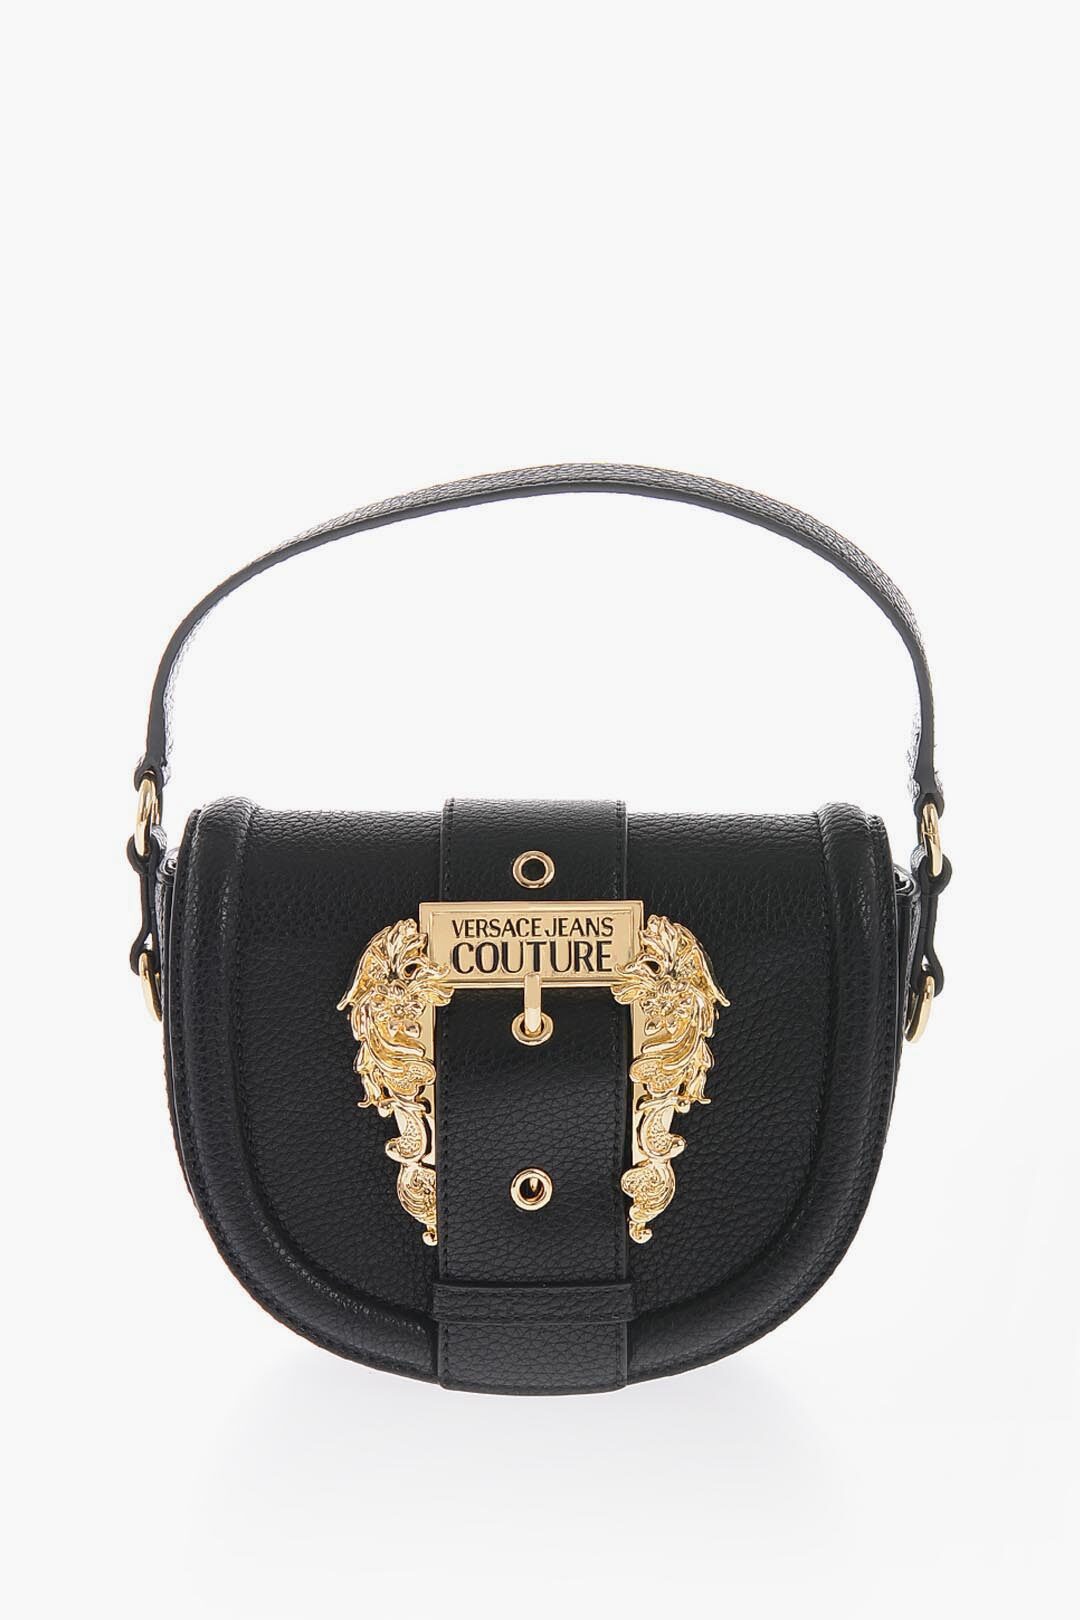 Versace JEANS COUTURE Faux Leather Saddle Bag with Maxi Golden